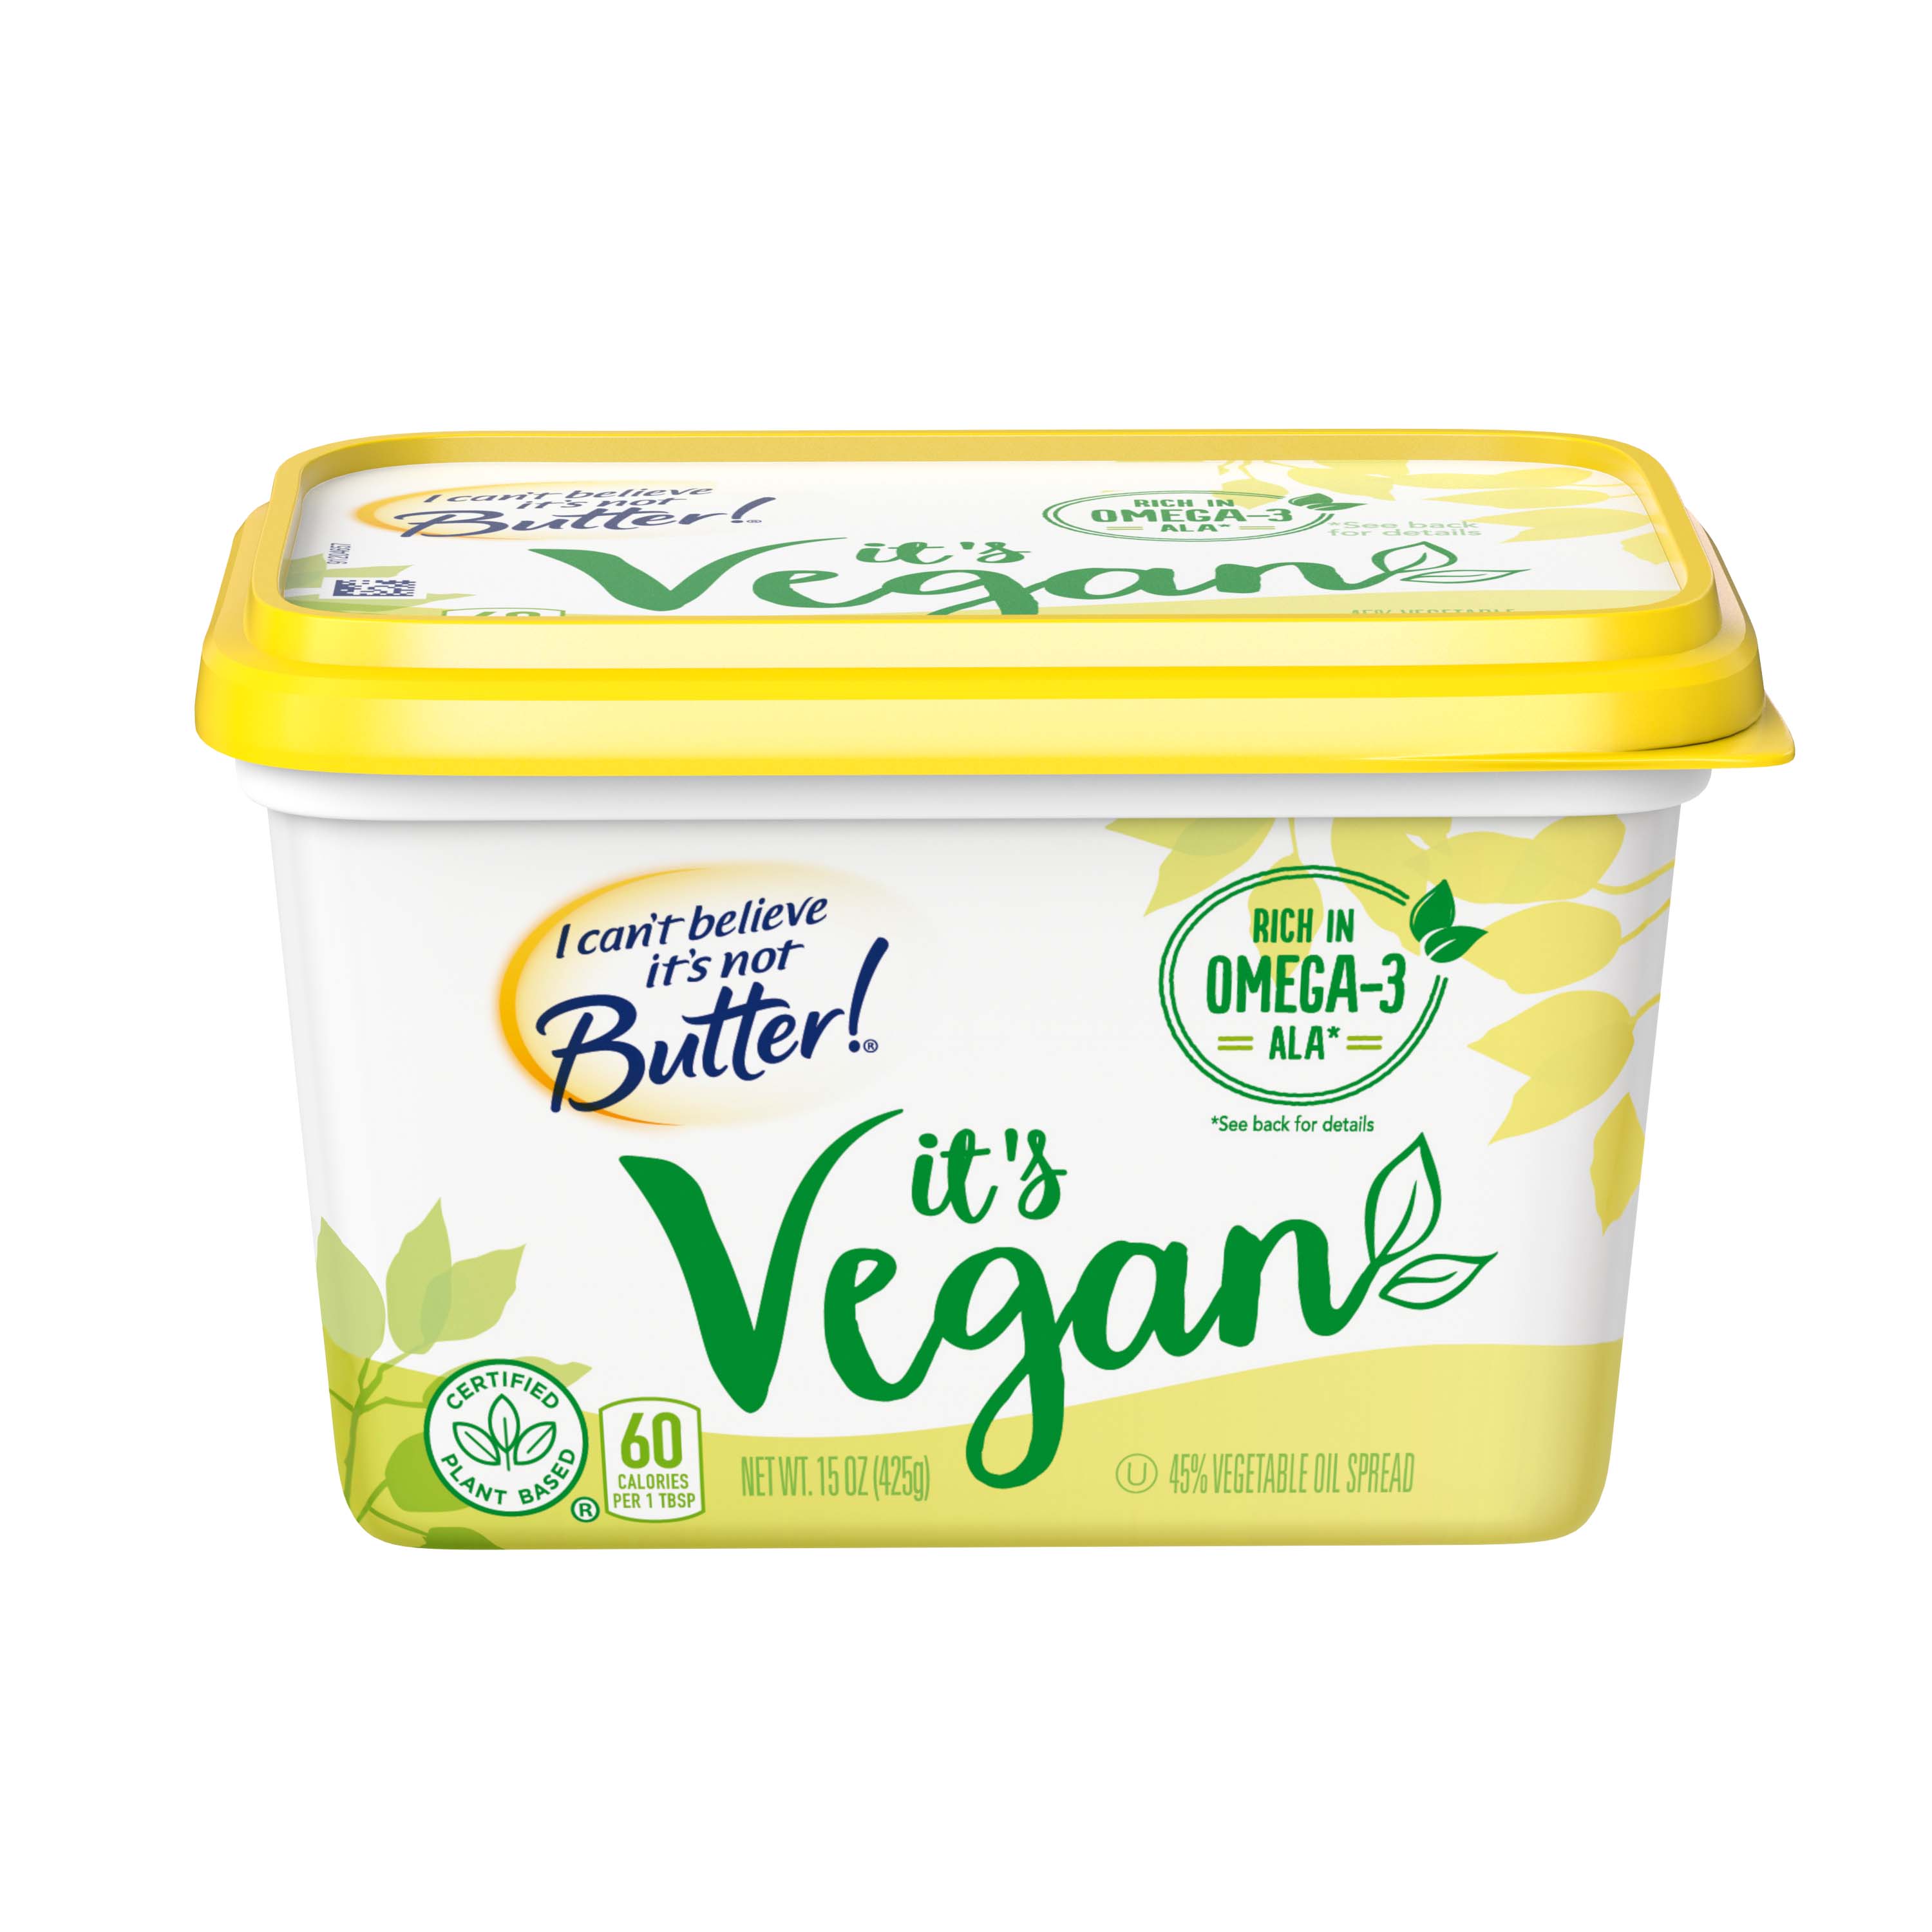 I Can’t Believe It’s Not Butter! Vegan Spread, 15 oz Tub (Refrigerated) - image 1 of 11